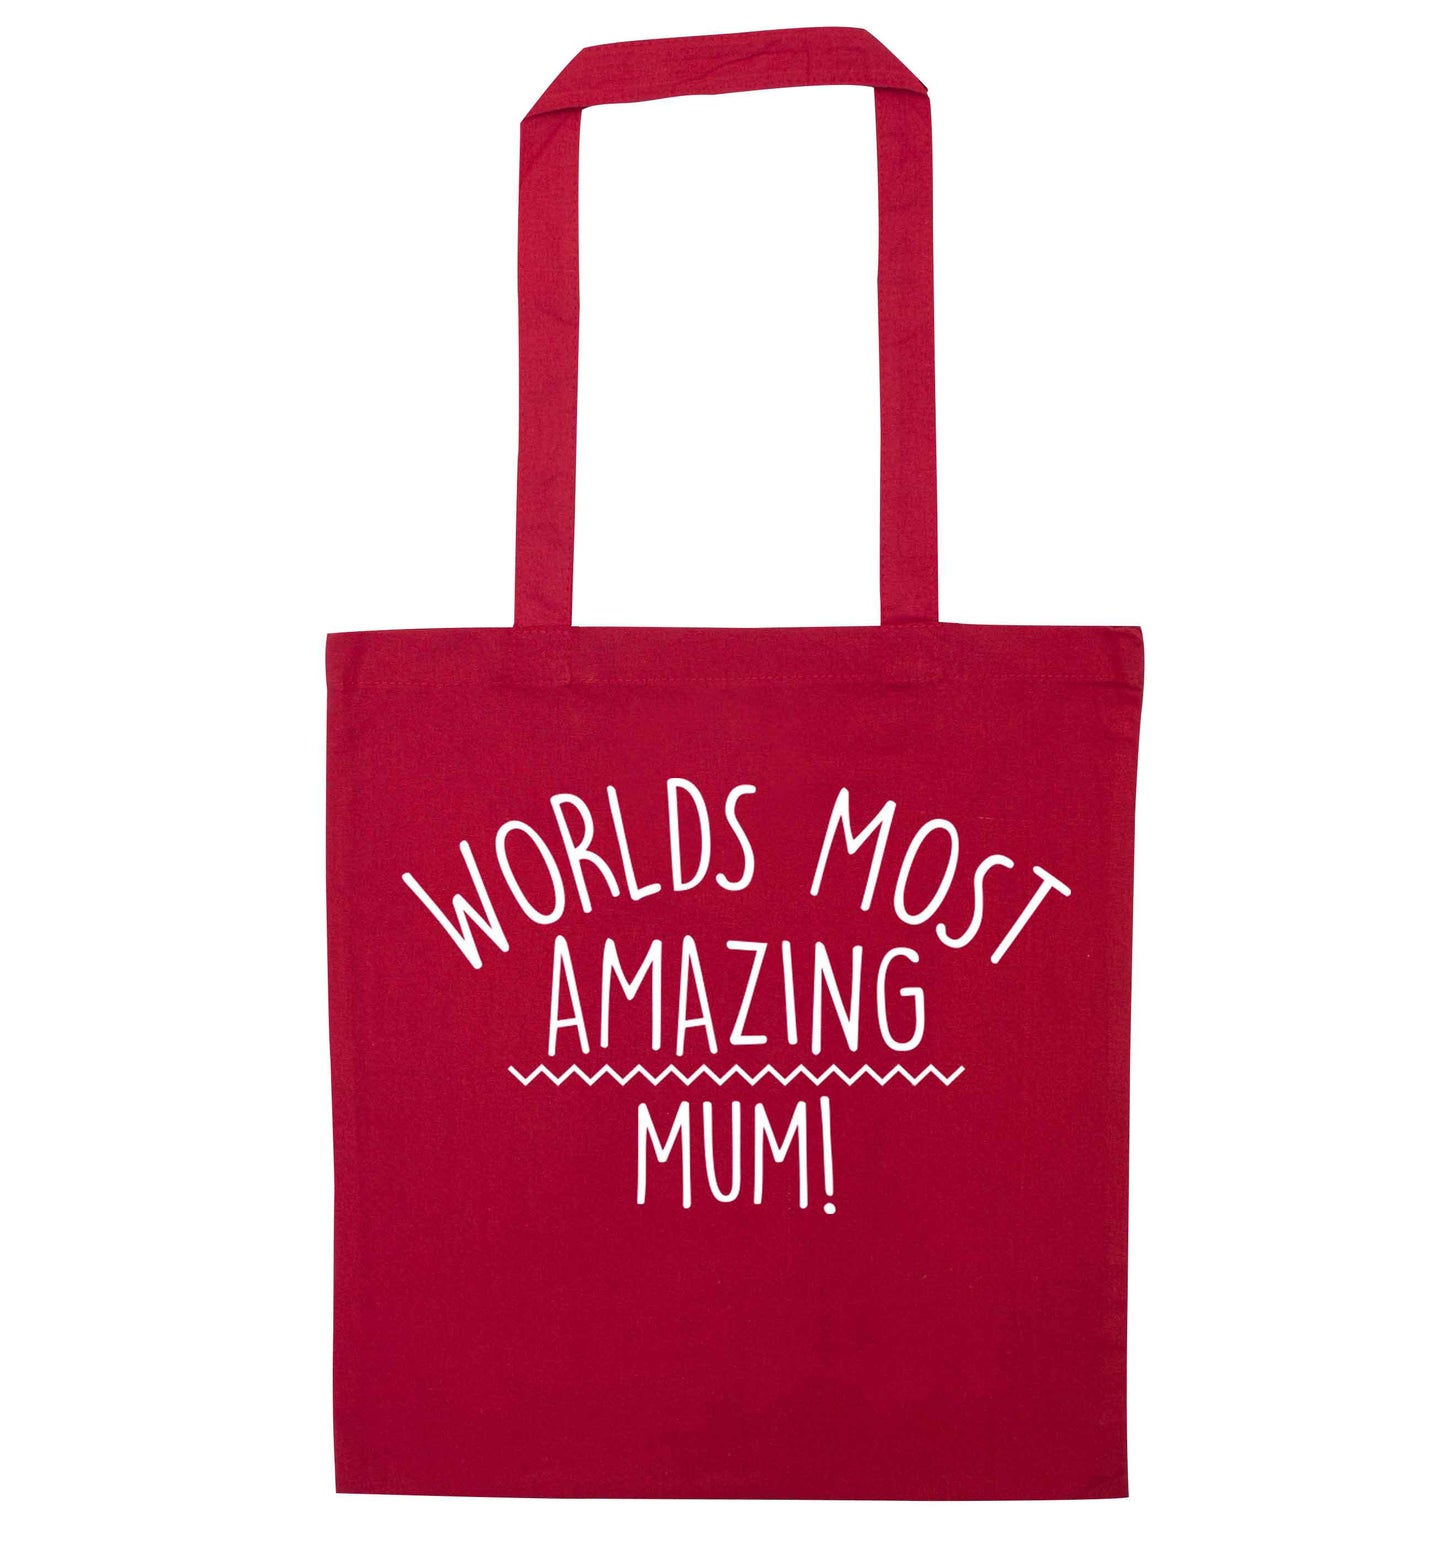 Worlds most amazing mum red tote bag